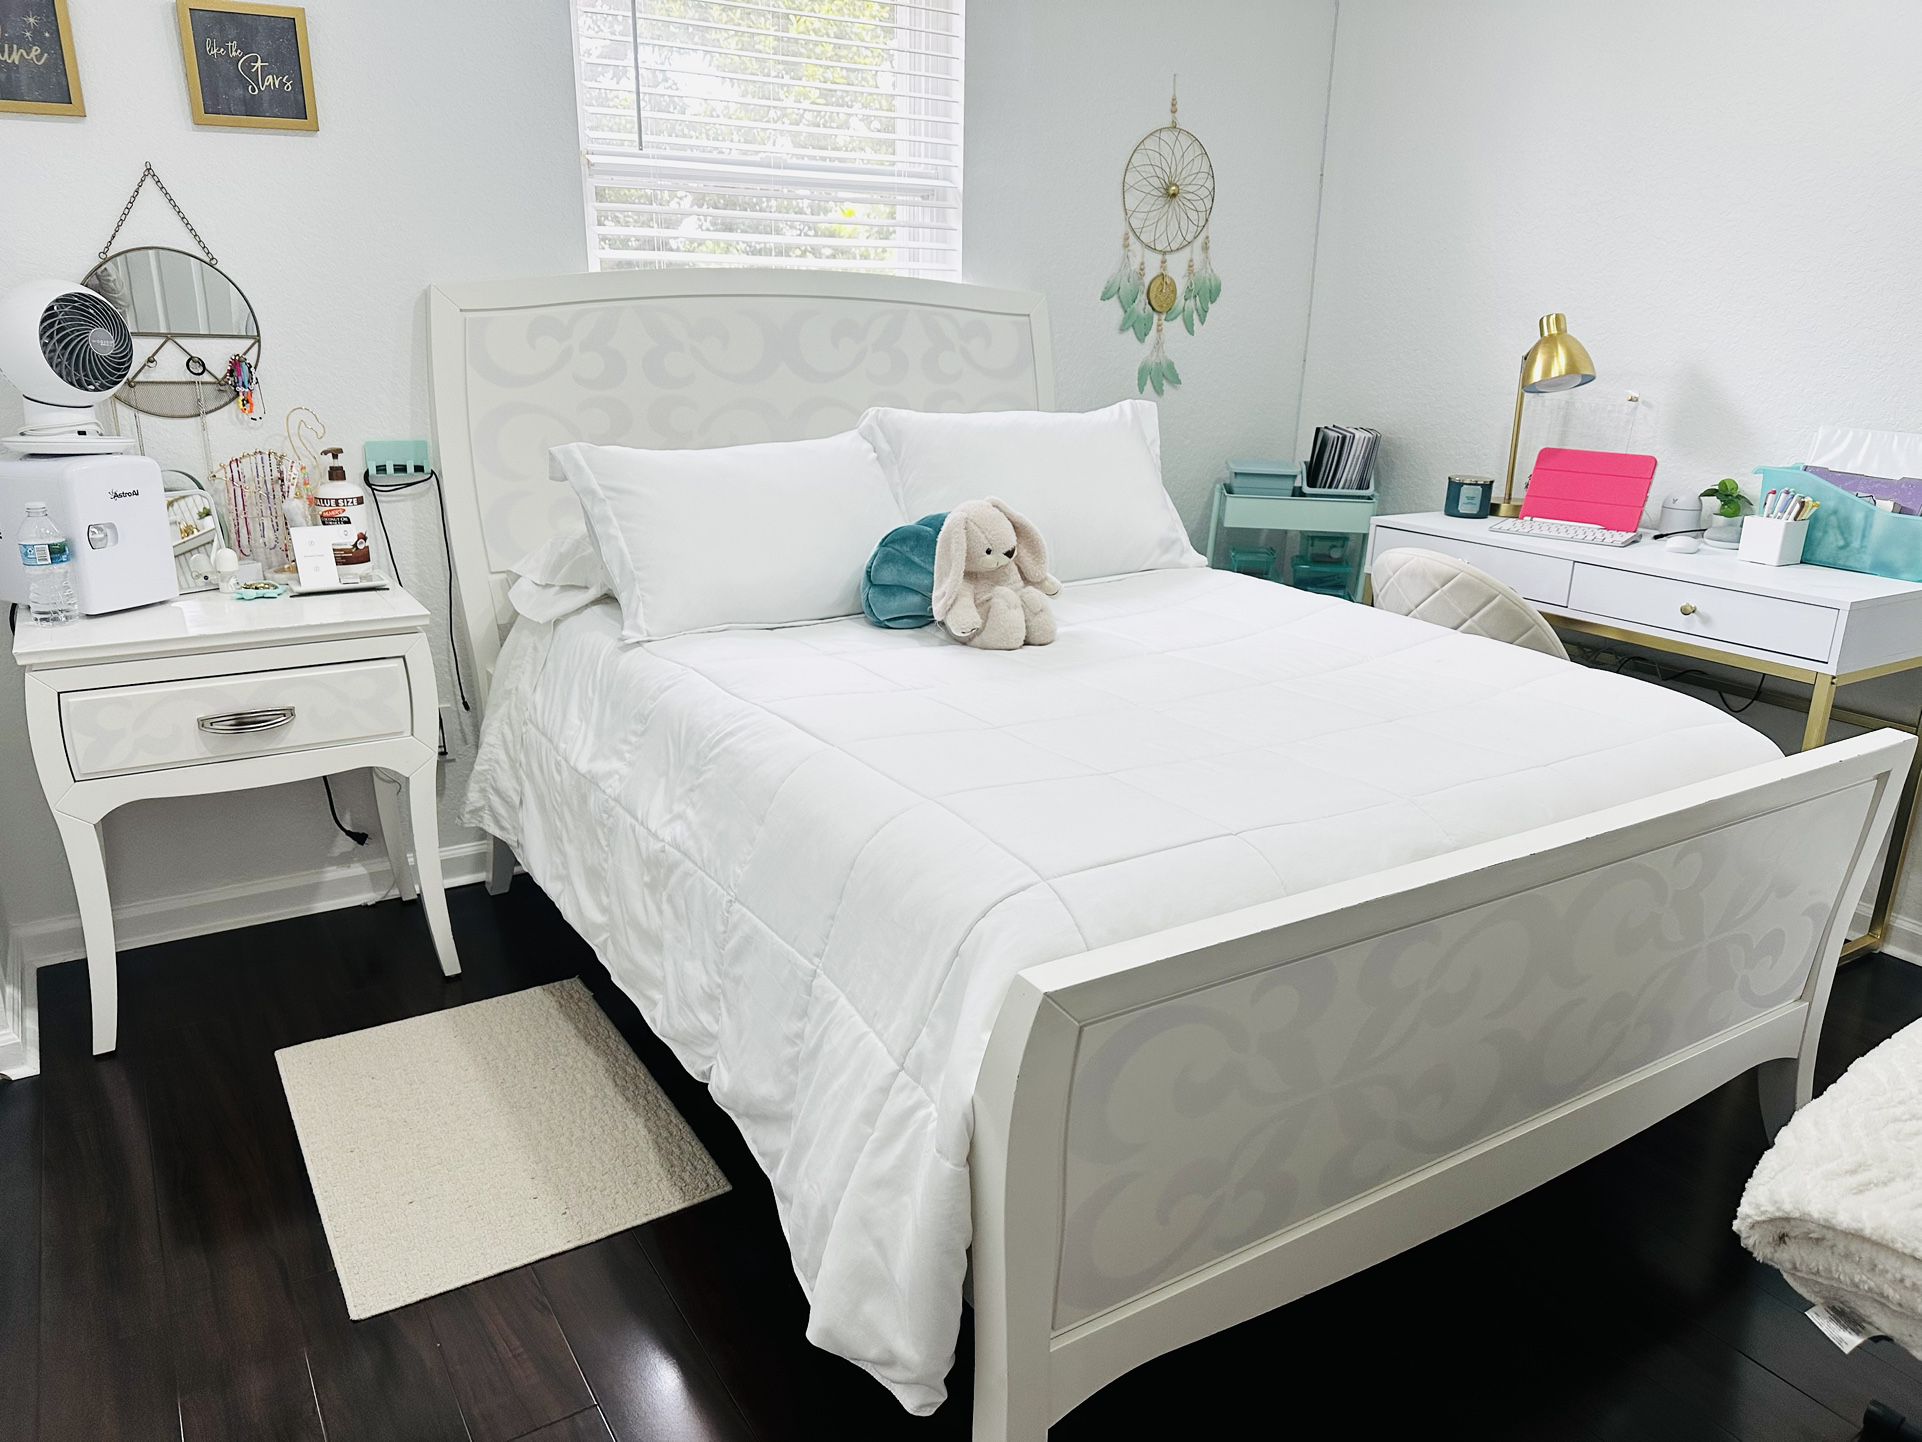 Bedroom and Set: Full size Bed, Nightstand and Dresser in good conditions